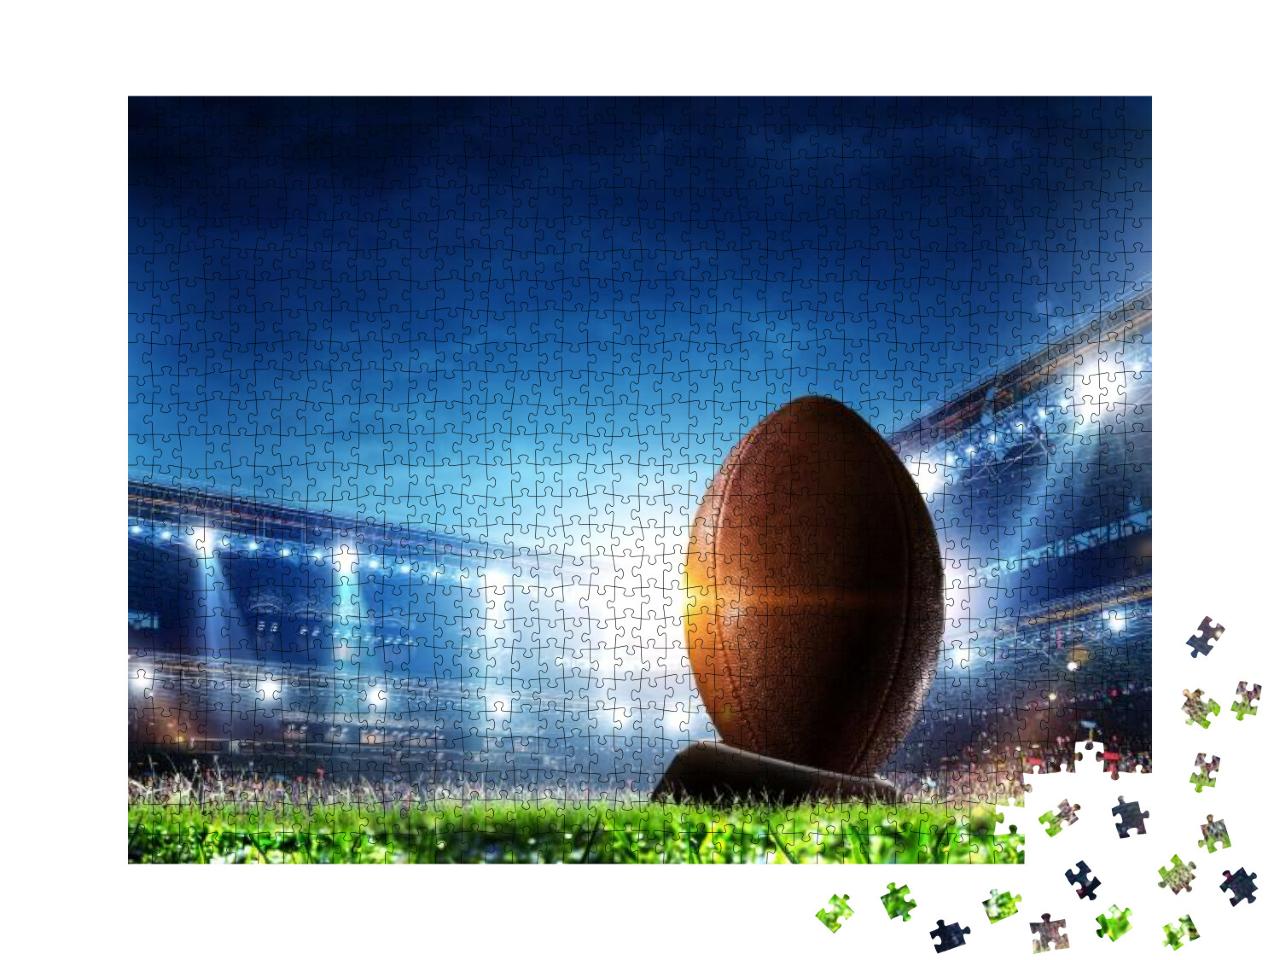 Full night football arena in lights Jigsaw Puzzle with 1000 pieces